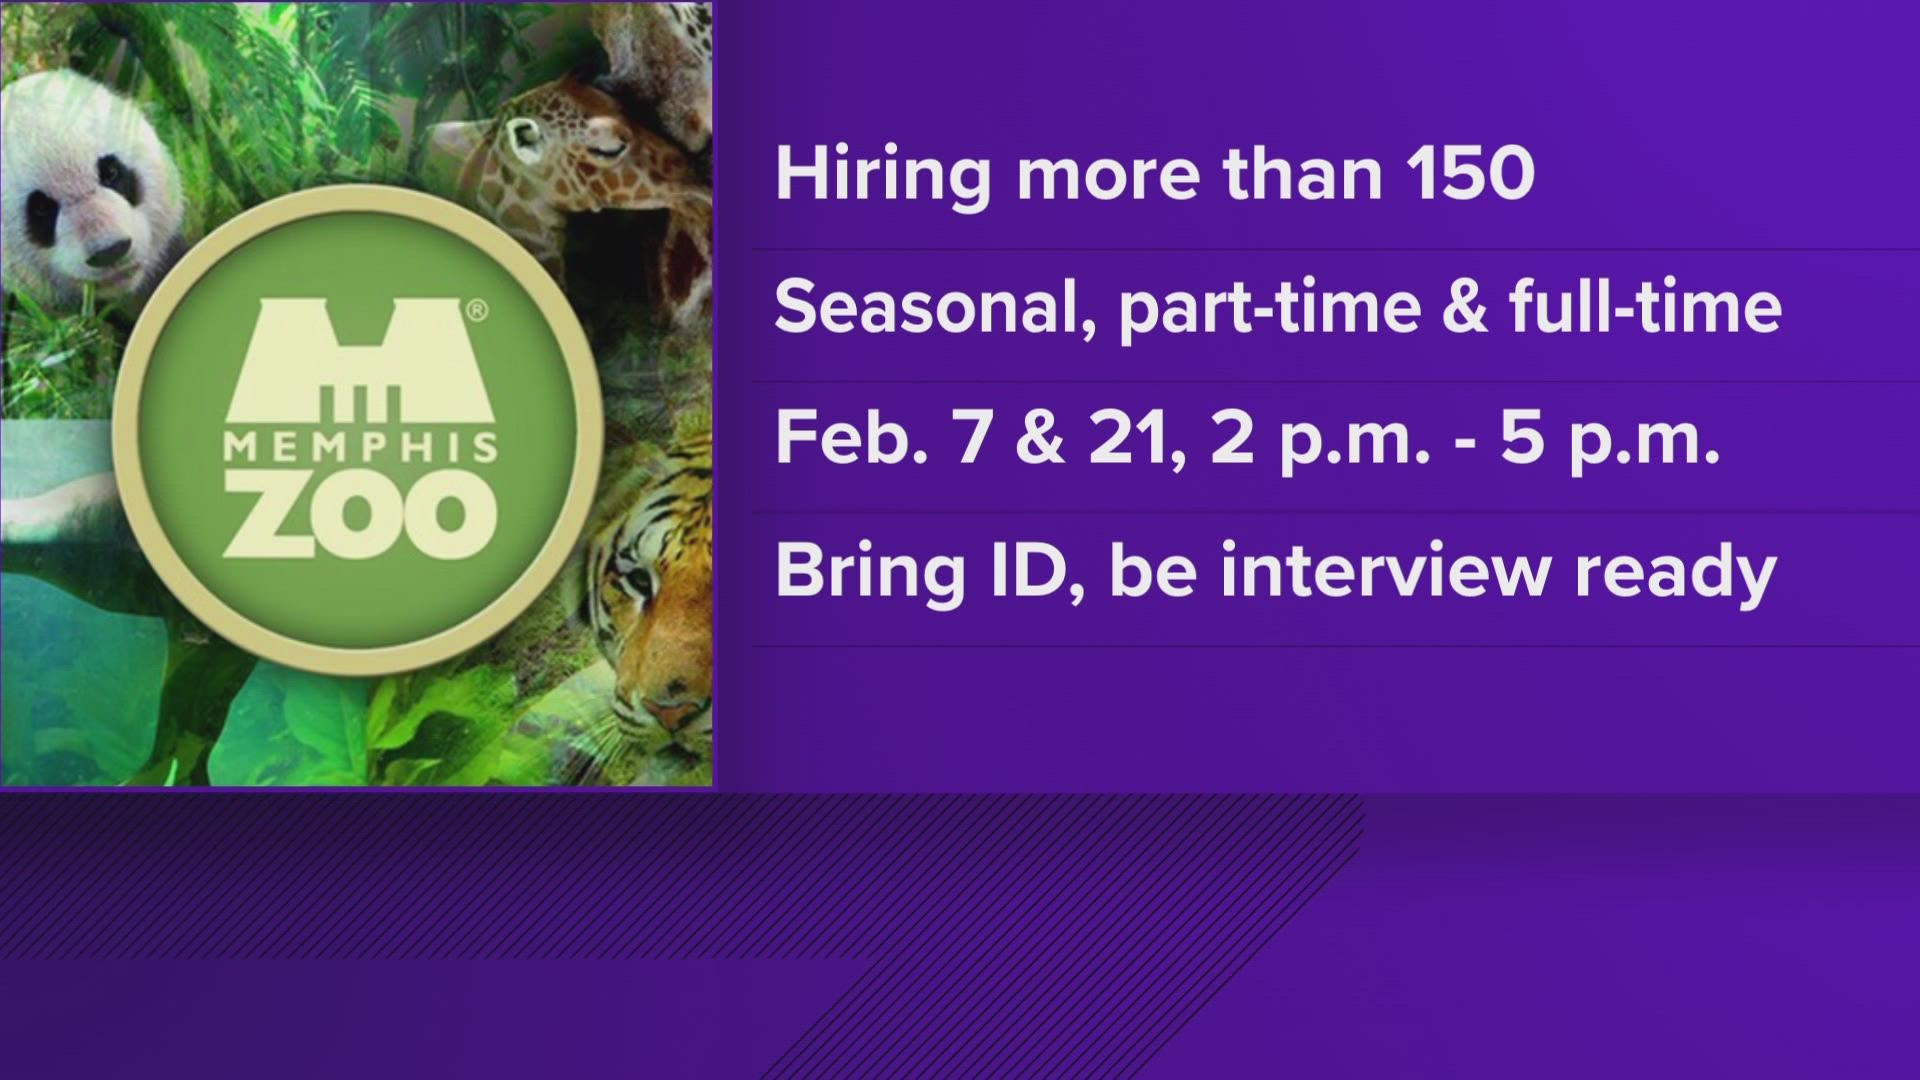 The fairs will be held Tuesday, Feb. 7, and Tuesday, Feb. 21, from 2 p.m. to 5 p.m. and the zoo said they are looking to hire more than 150 people for spring.